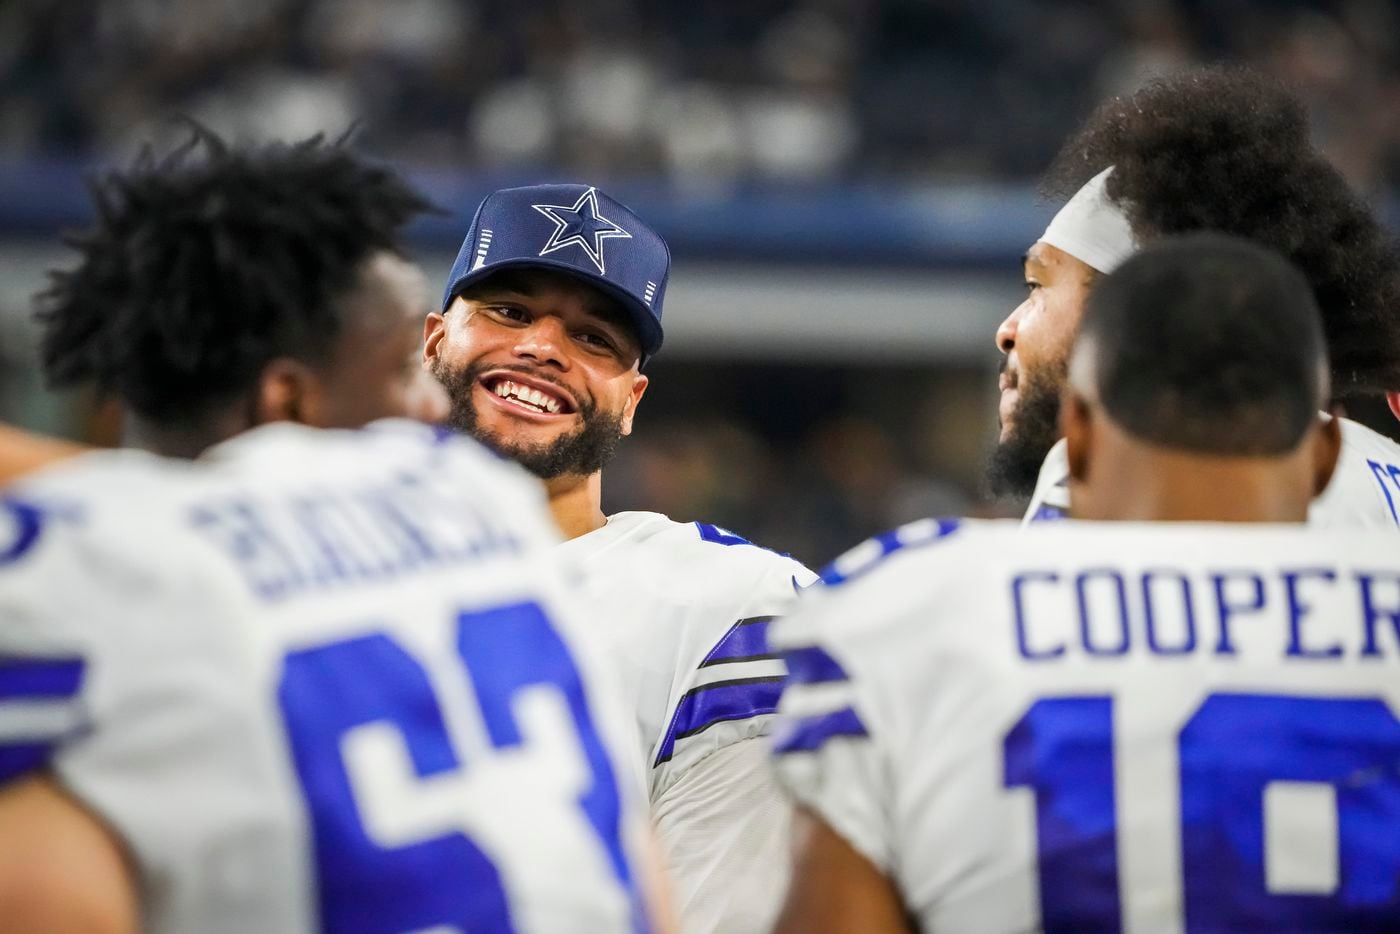 Dallas Cowboys quarterback Dak Prescott laughs on the bench with offensive tackle La'el Collins (71), wide receiver Amari Cooper (19) and center Tyler Biadasz (63) during the second half of an NFL football game against the Washington Football Team at AT&T Stadium on Sunday, Dec. 26, 2021, in Arlington. The Cowboys won the game 56-14.